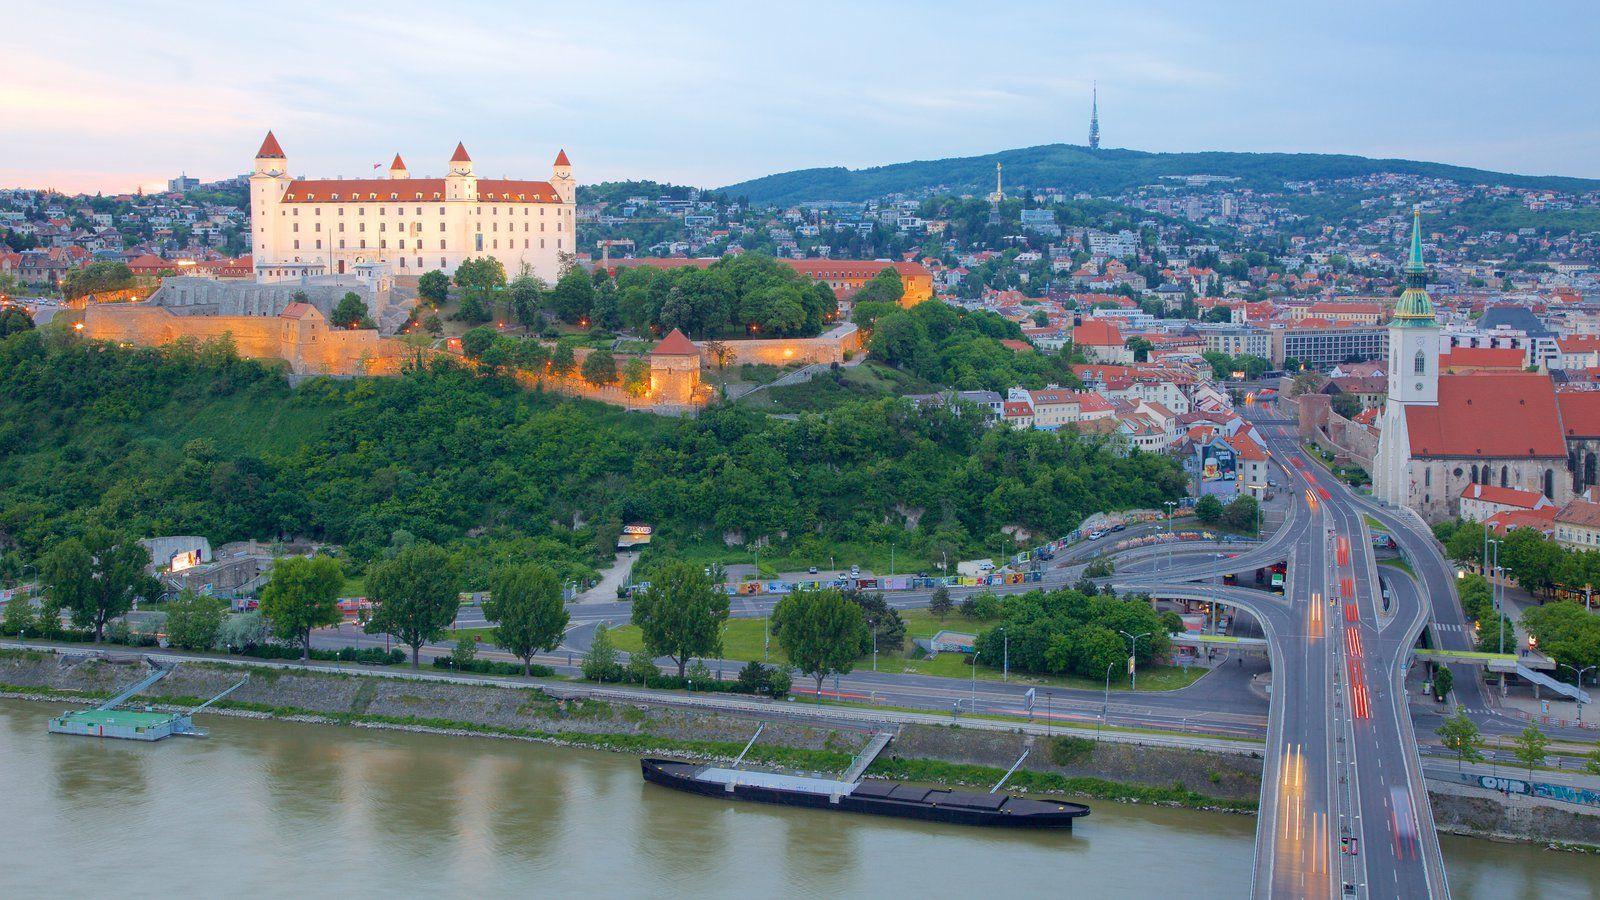 Castles & Palaces Pictures: View Image of Bratislava